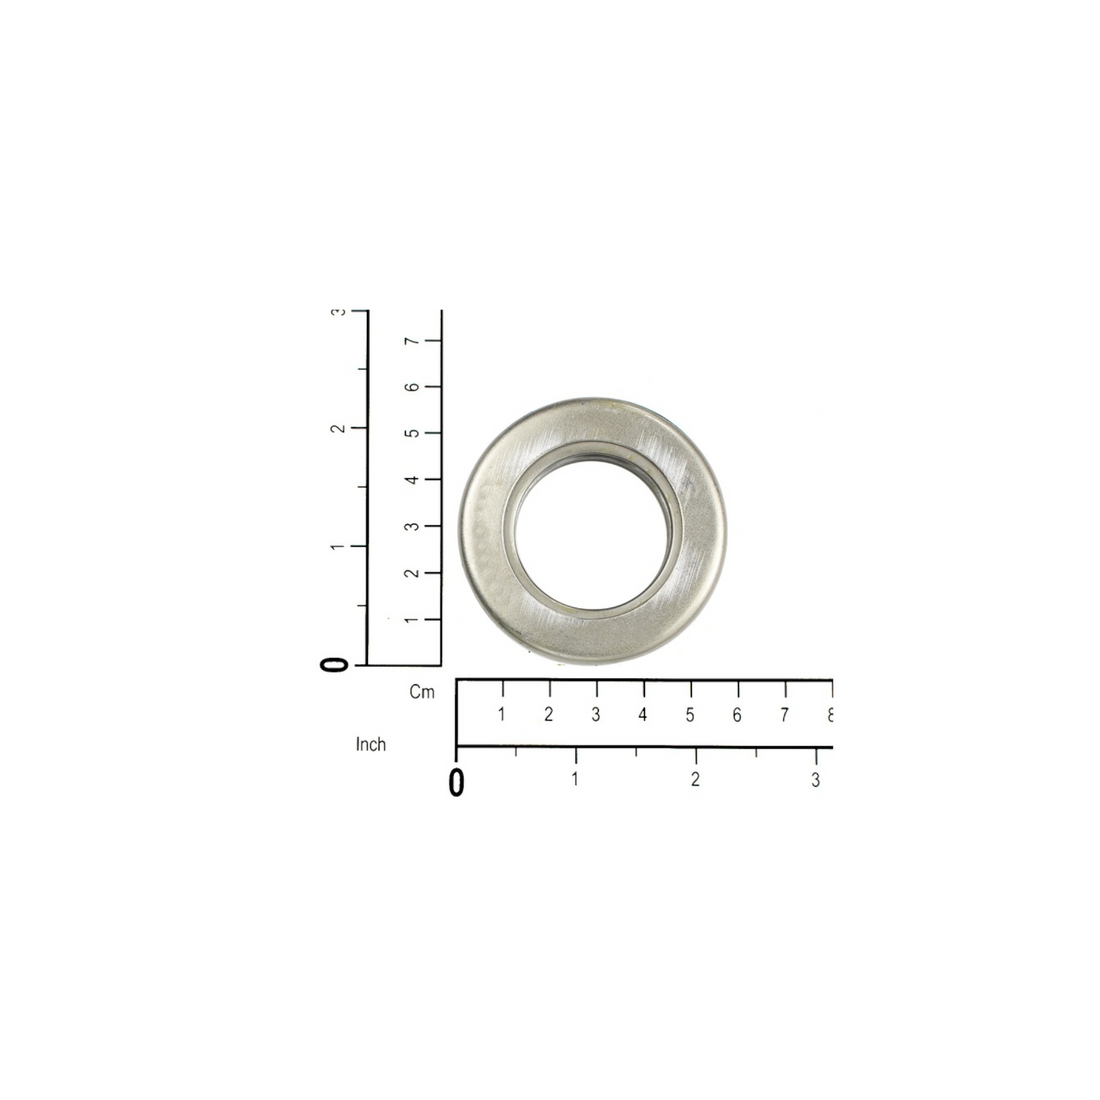 R&M Parts - Thrust Bearing, Part Number: 6301610200